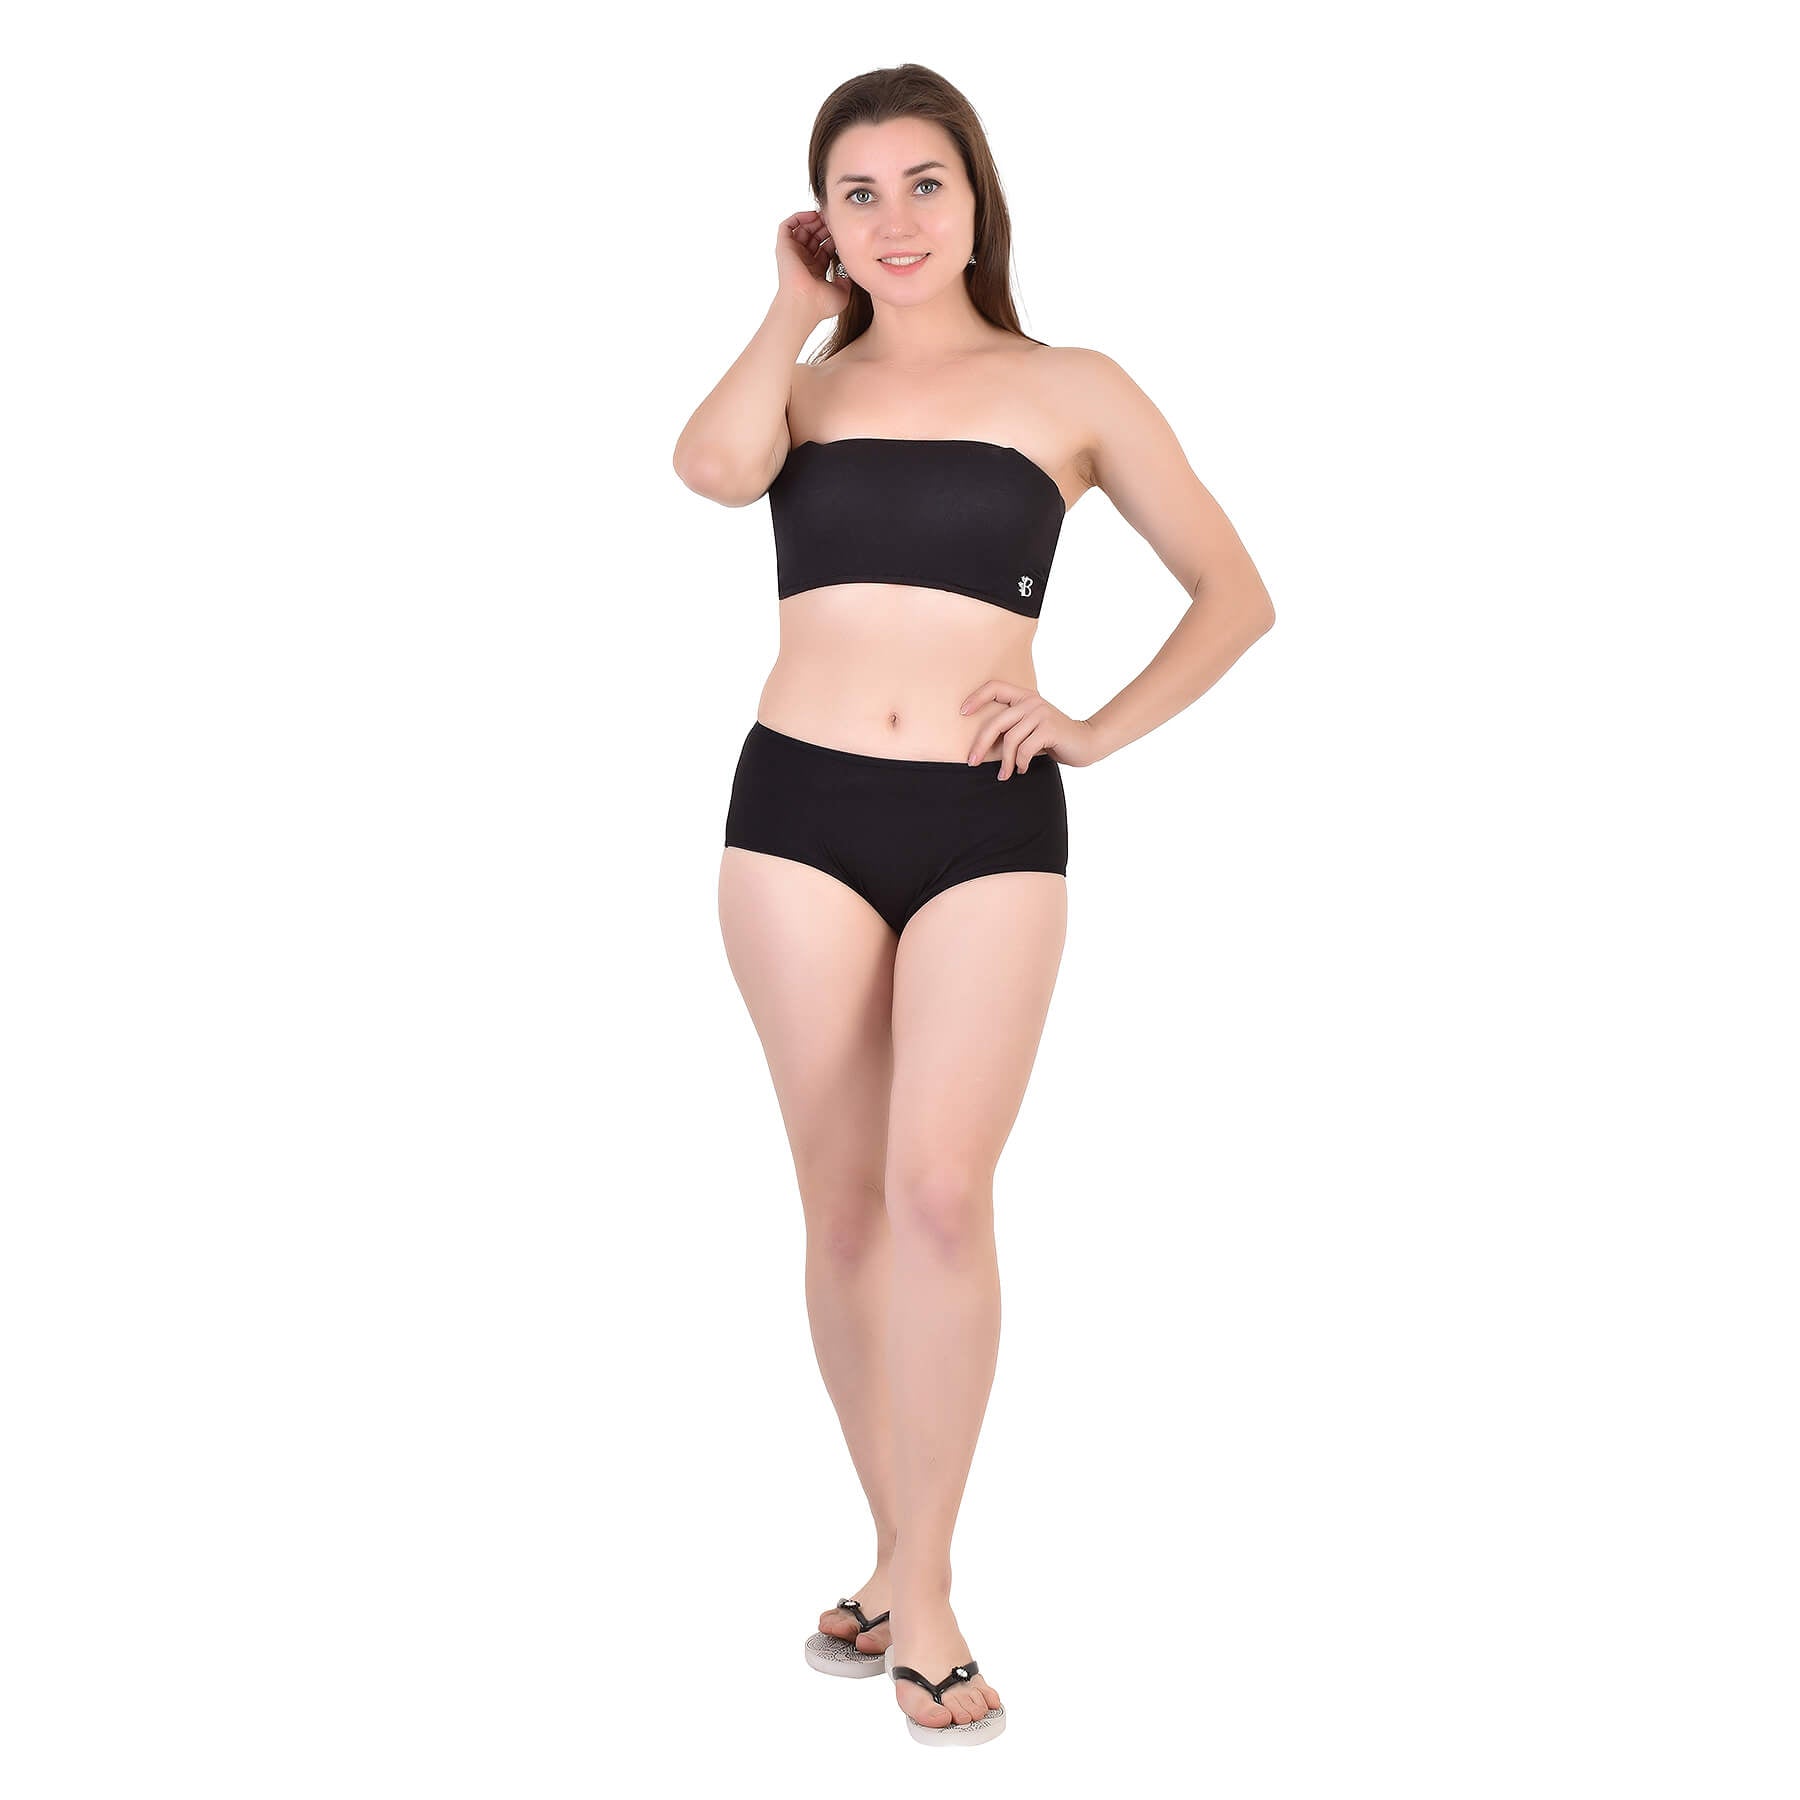 Bamboo Fabric Mid Waist Panty Pack of 2